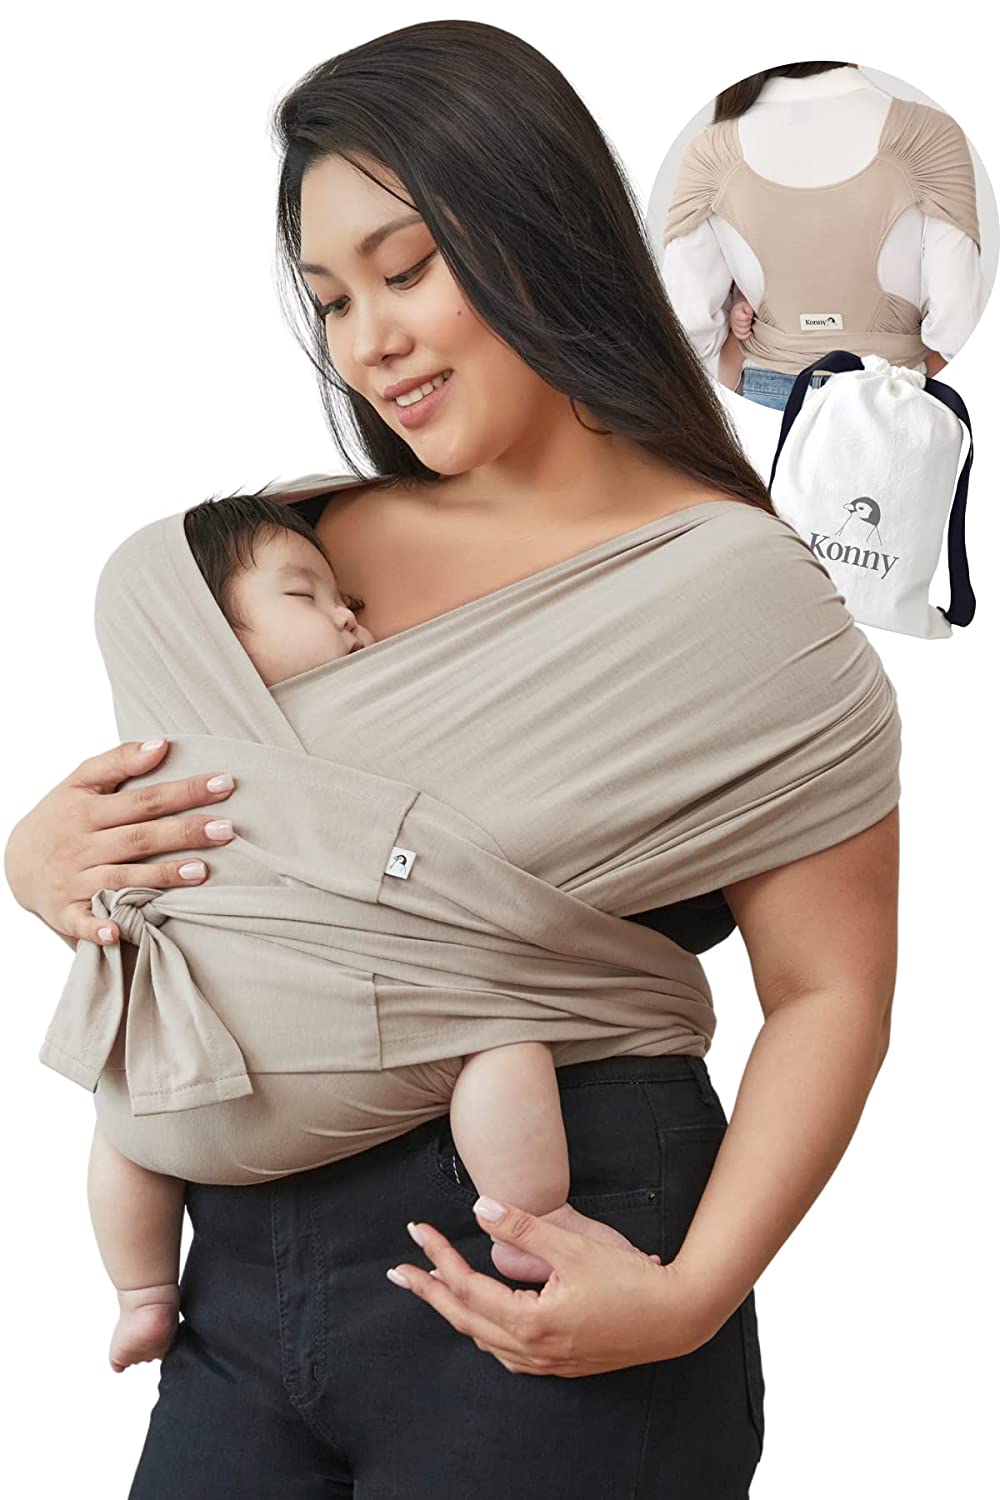 Konny Baby Carrier | Ultra-Lightweight, Easy Swaddle | Newborns, Infants up to 20 kg Toddlers | Soft and Breathable Fabric | Useful Sleep Solution (Beige, 3XL)